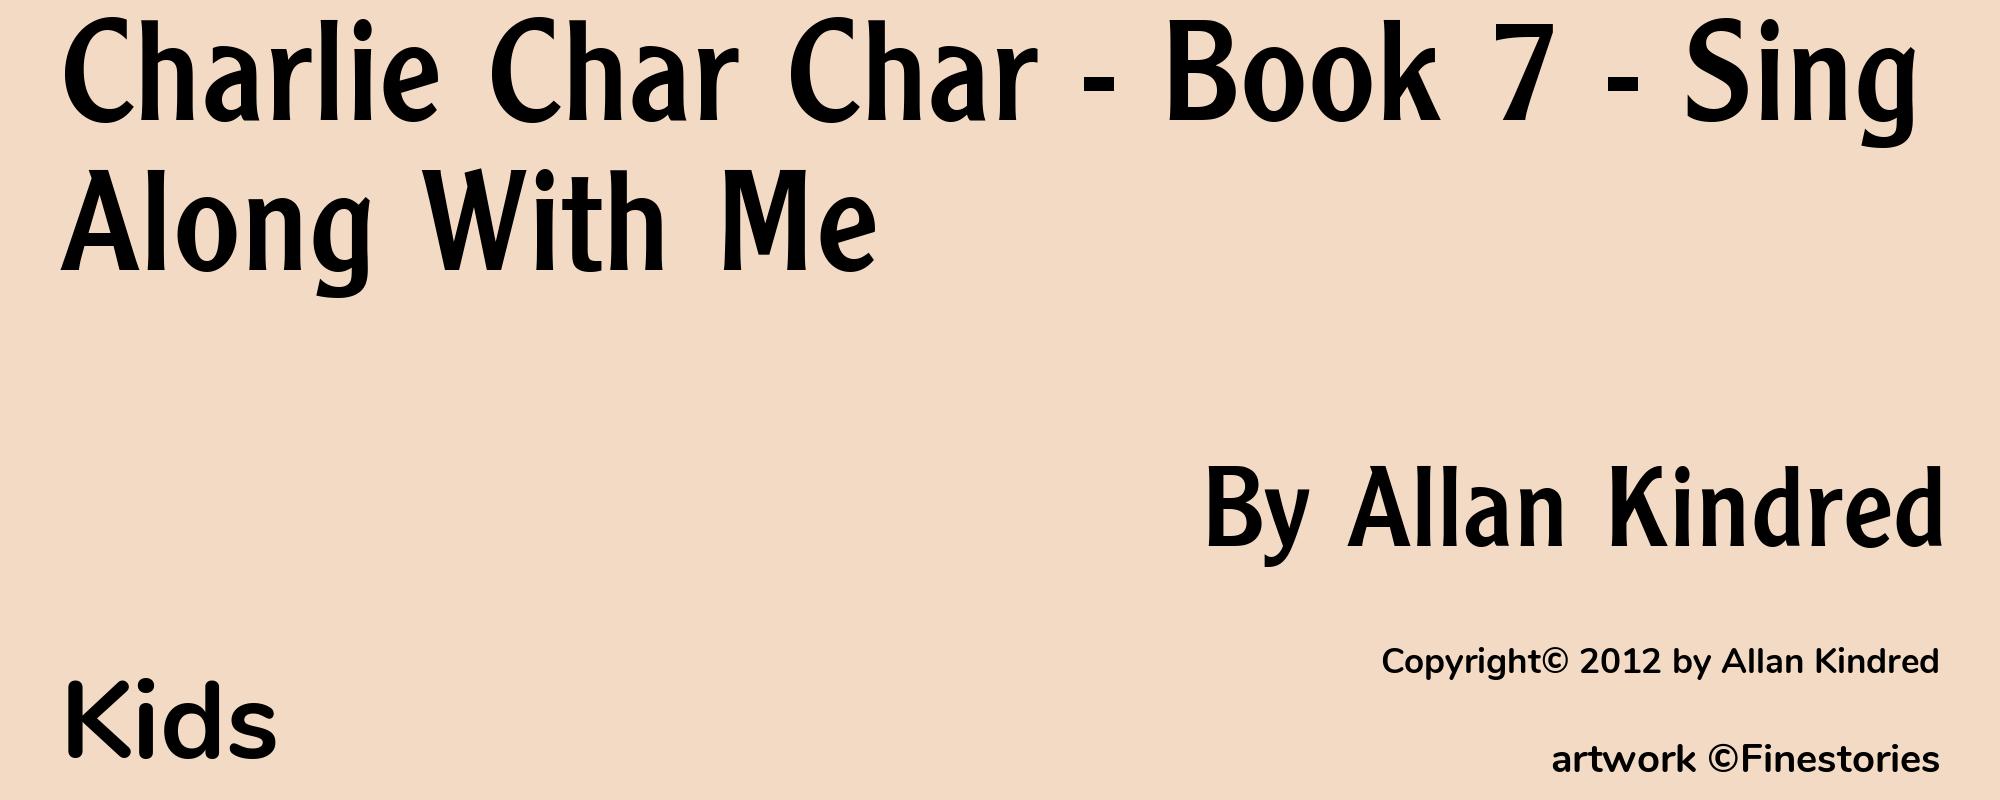 Charlie Char Char - Book 7 - Sing Along With Me - Cover